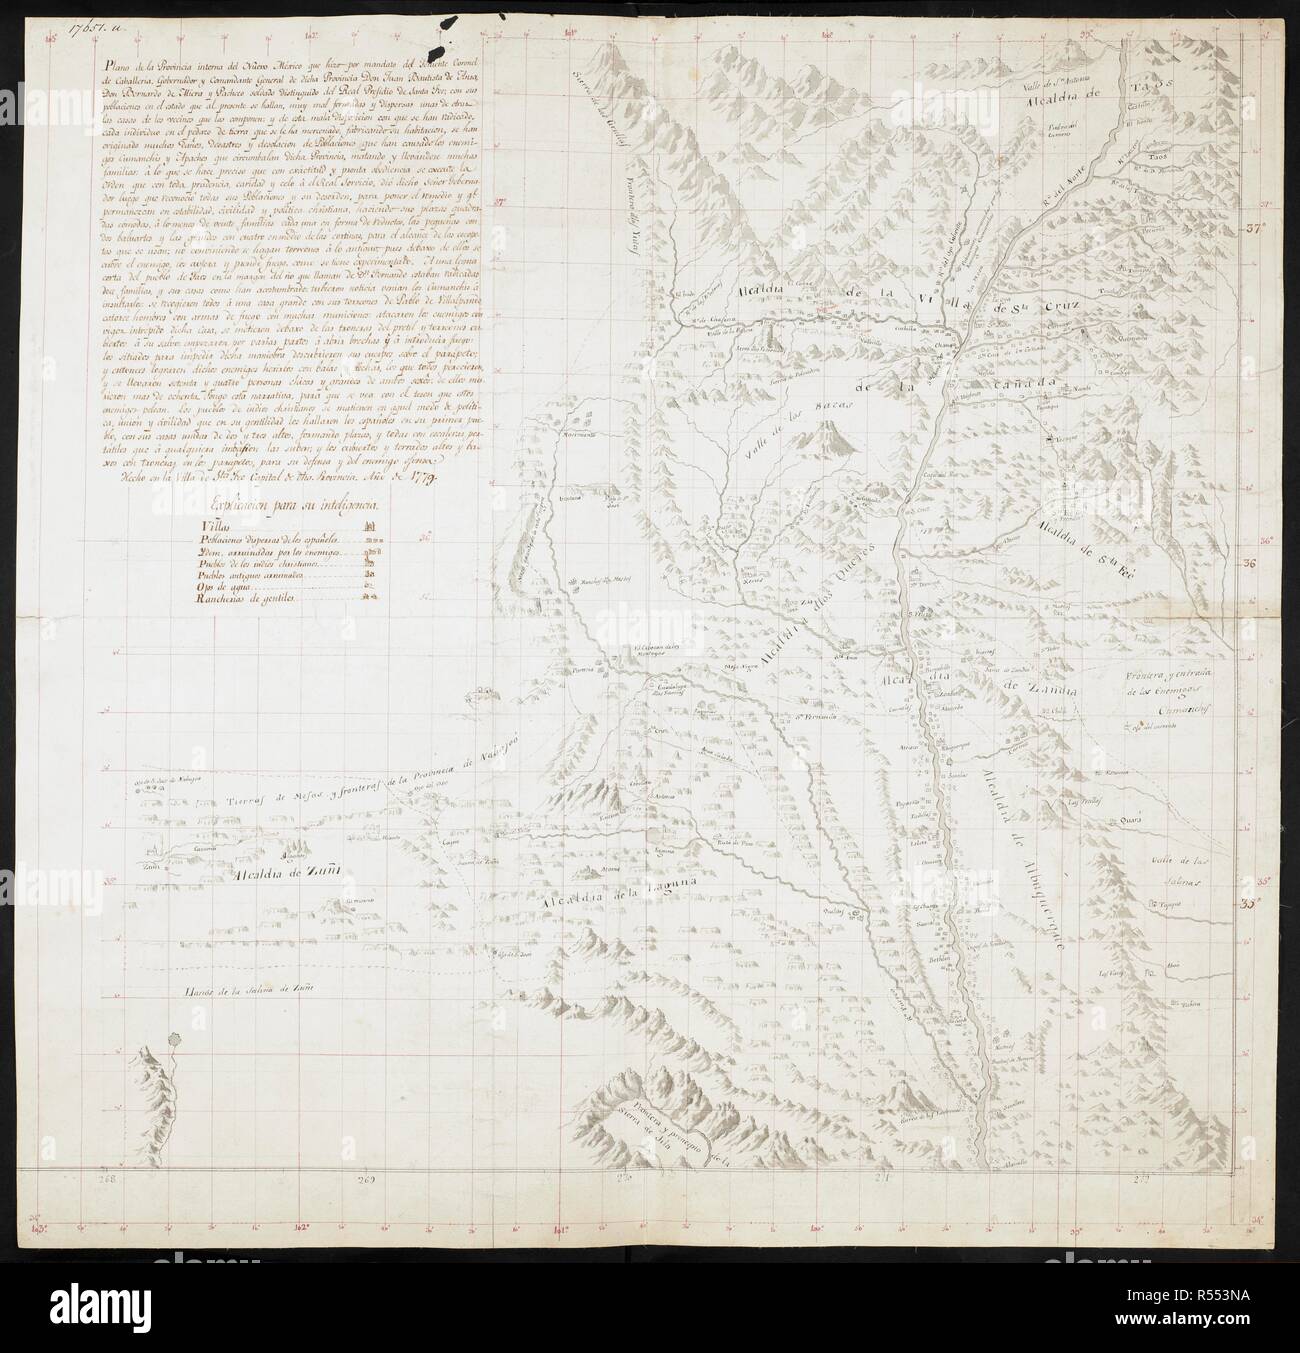 Map of part of New Mexico, with the Rio Grande and Santa Fe. N. America; 1779. Source: Add. 17651 U. Language: Spanish. Stock Photo